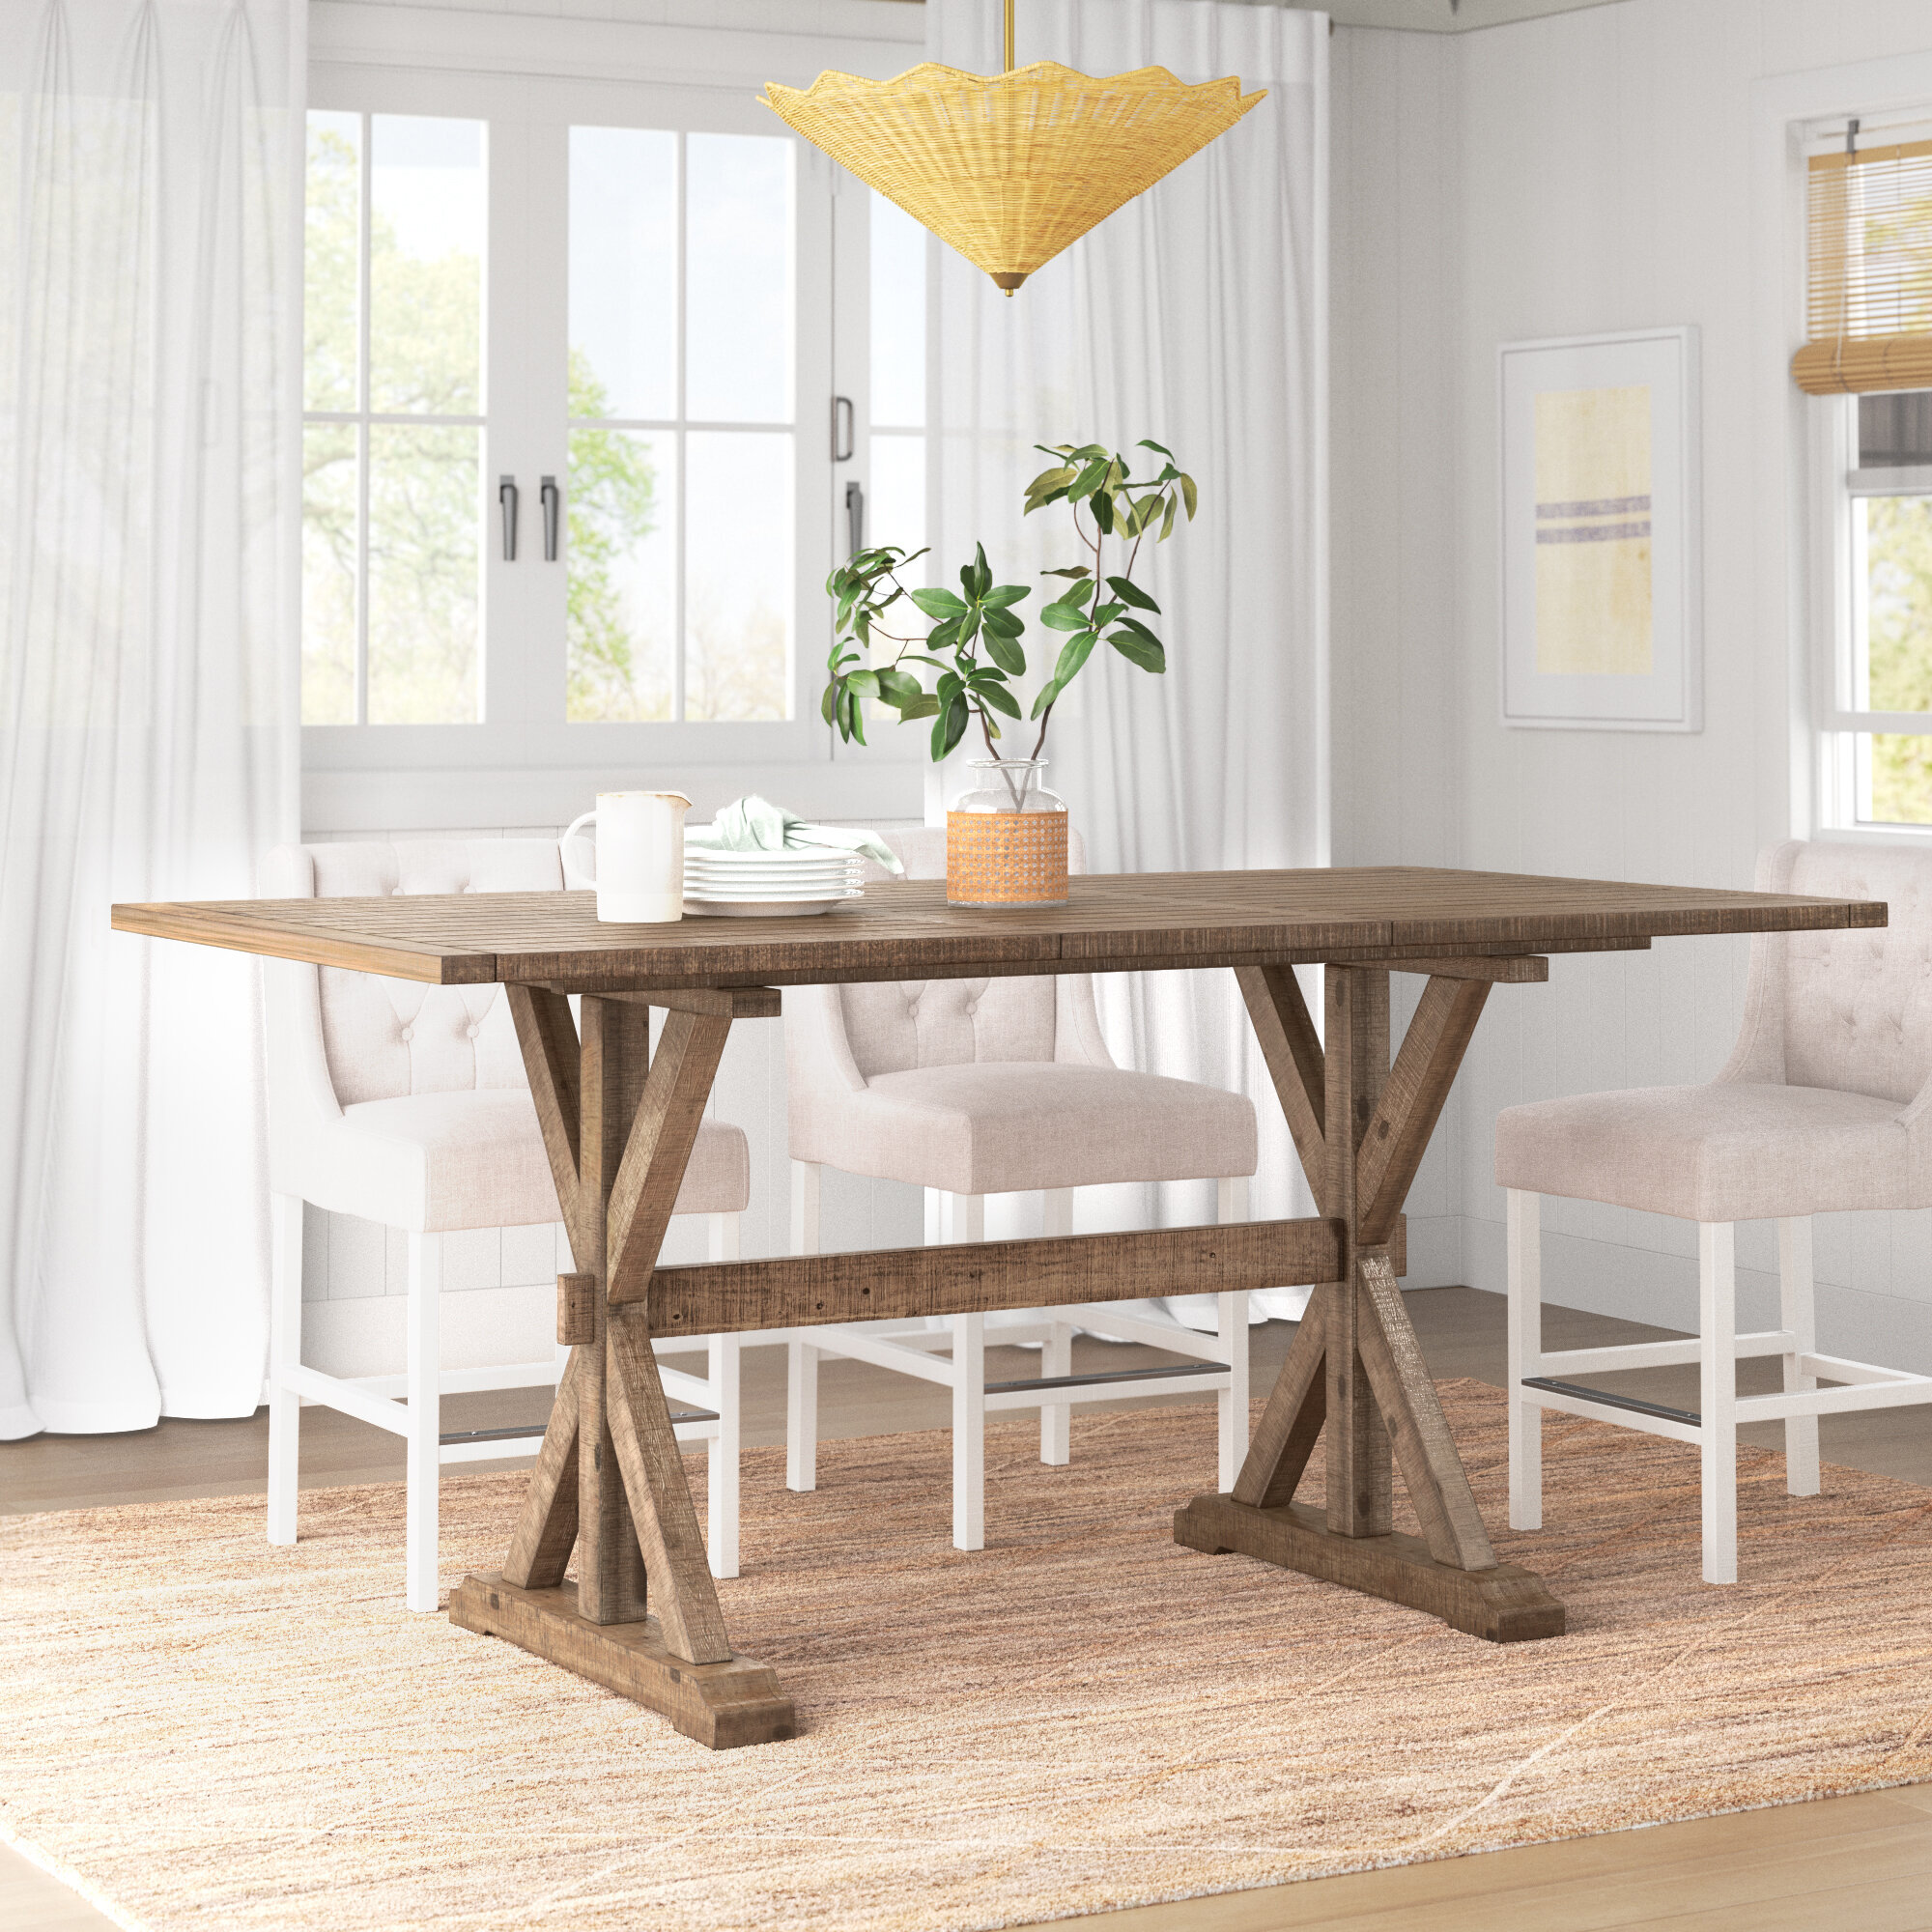 Dining Table 100 x 60 cm for tall people – Wetall